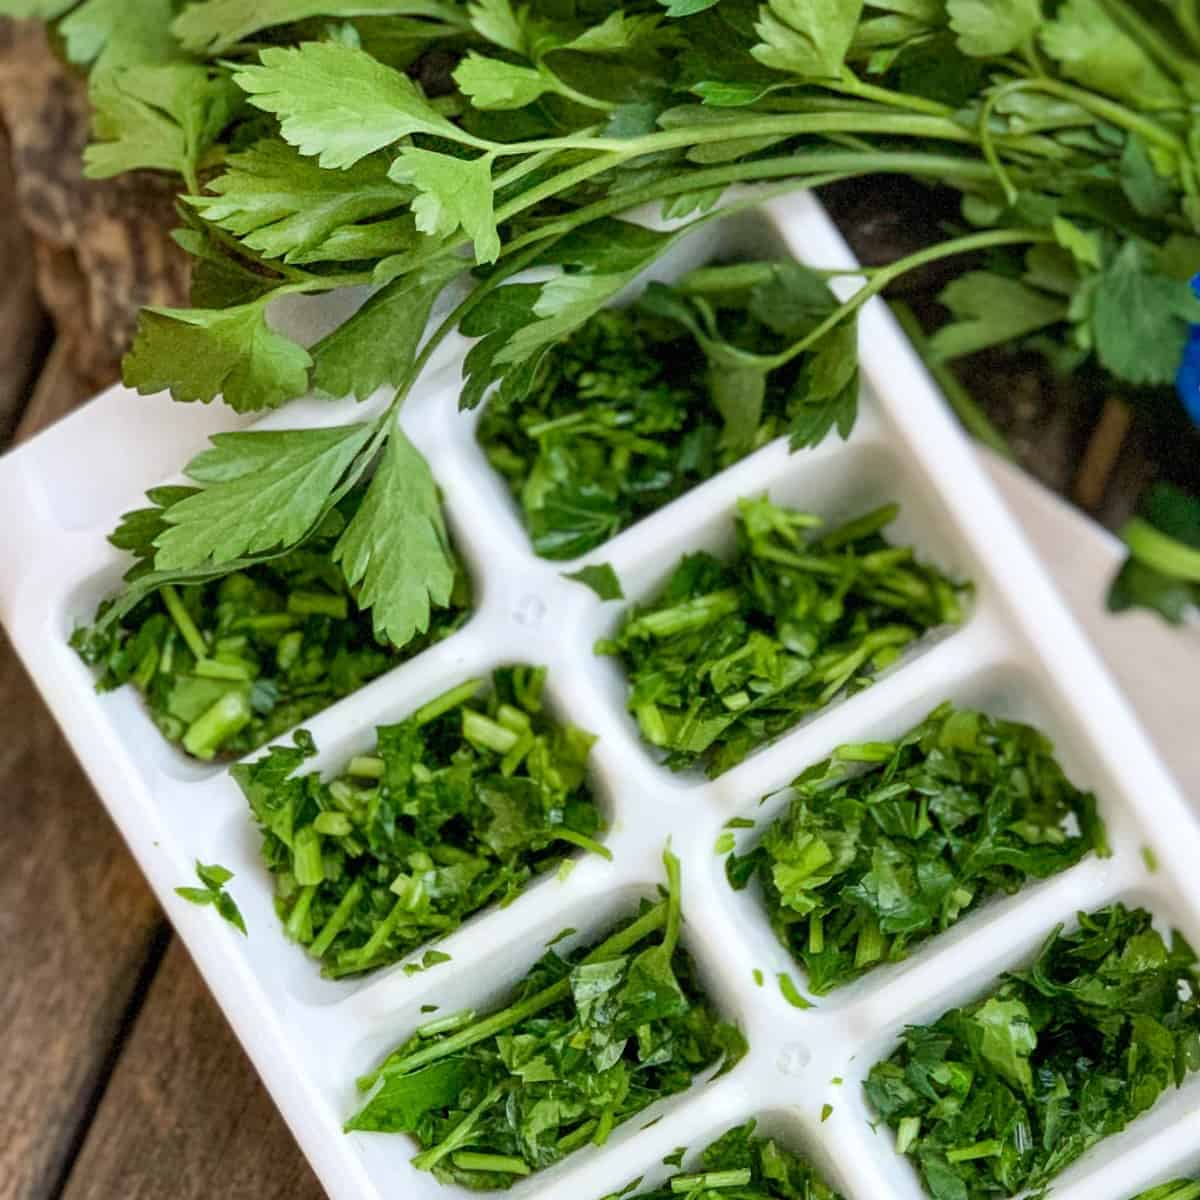 How to Store and Preserve Fresh Herbs - CNET